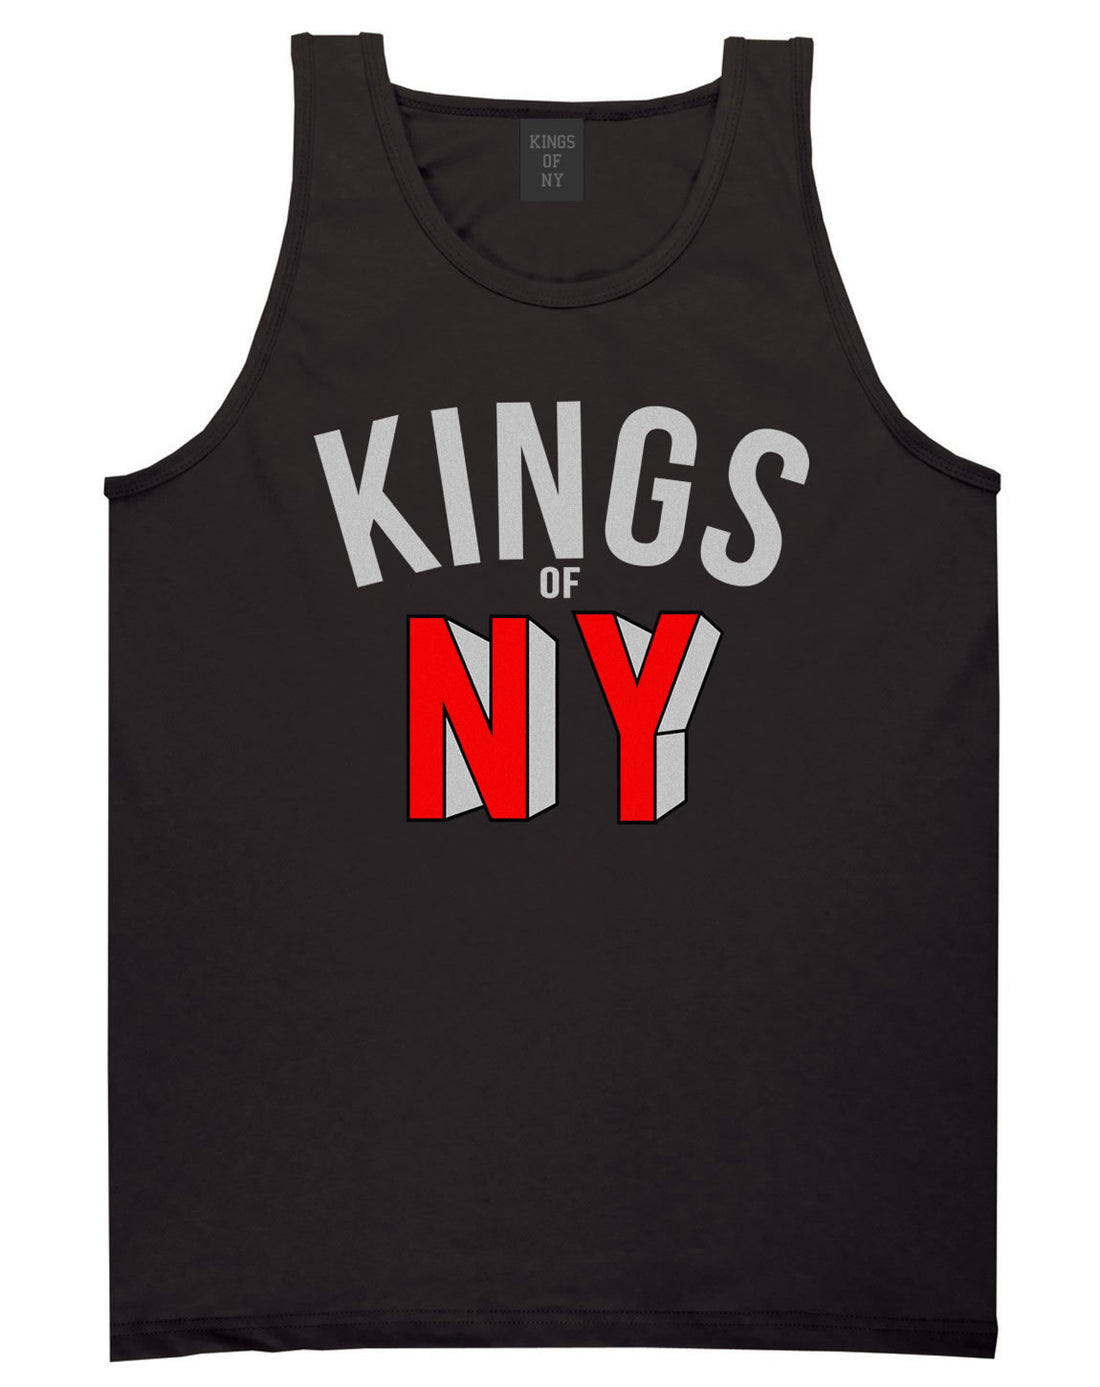 NY Red Block Letter Printed Tank Top in Black by Kings Of NY